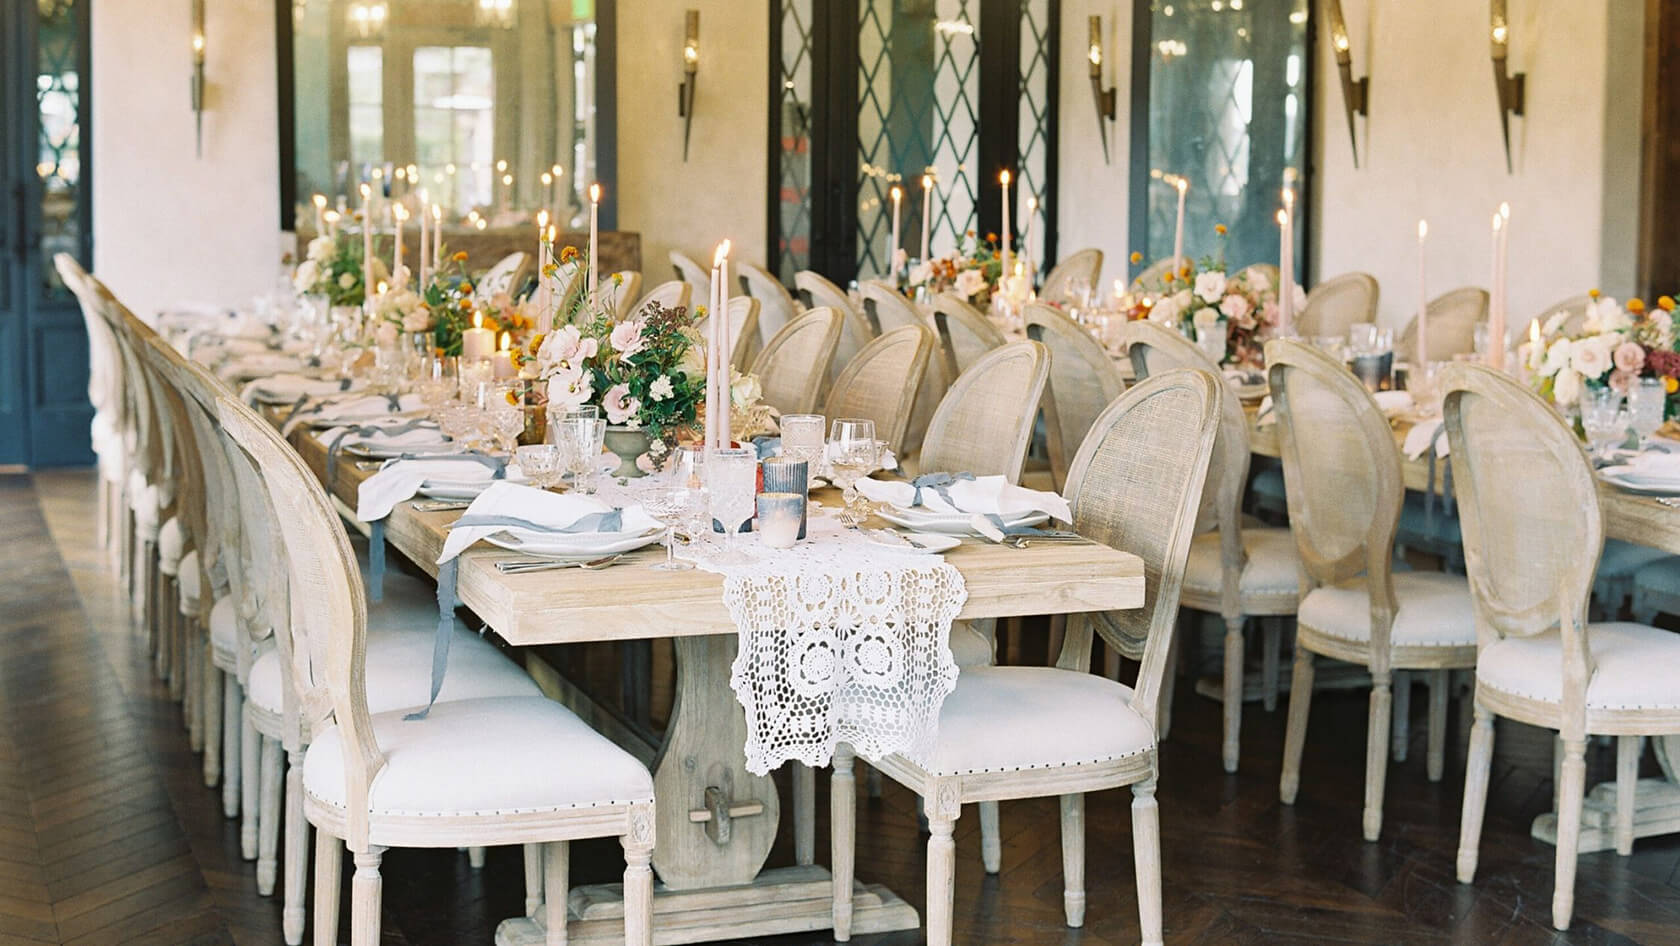 8 Big Ideas for Planning an Intimate Micro Wedding Celebration